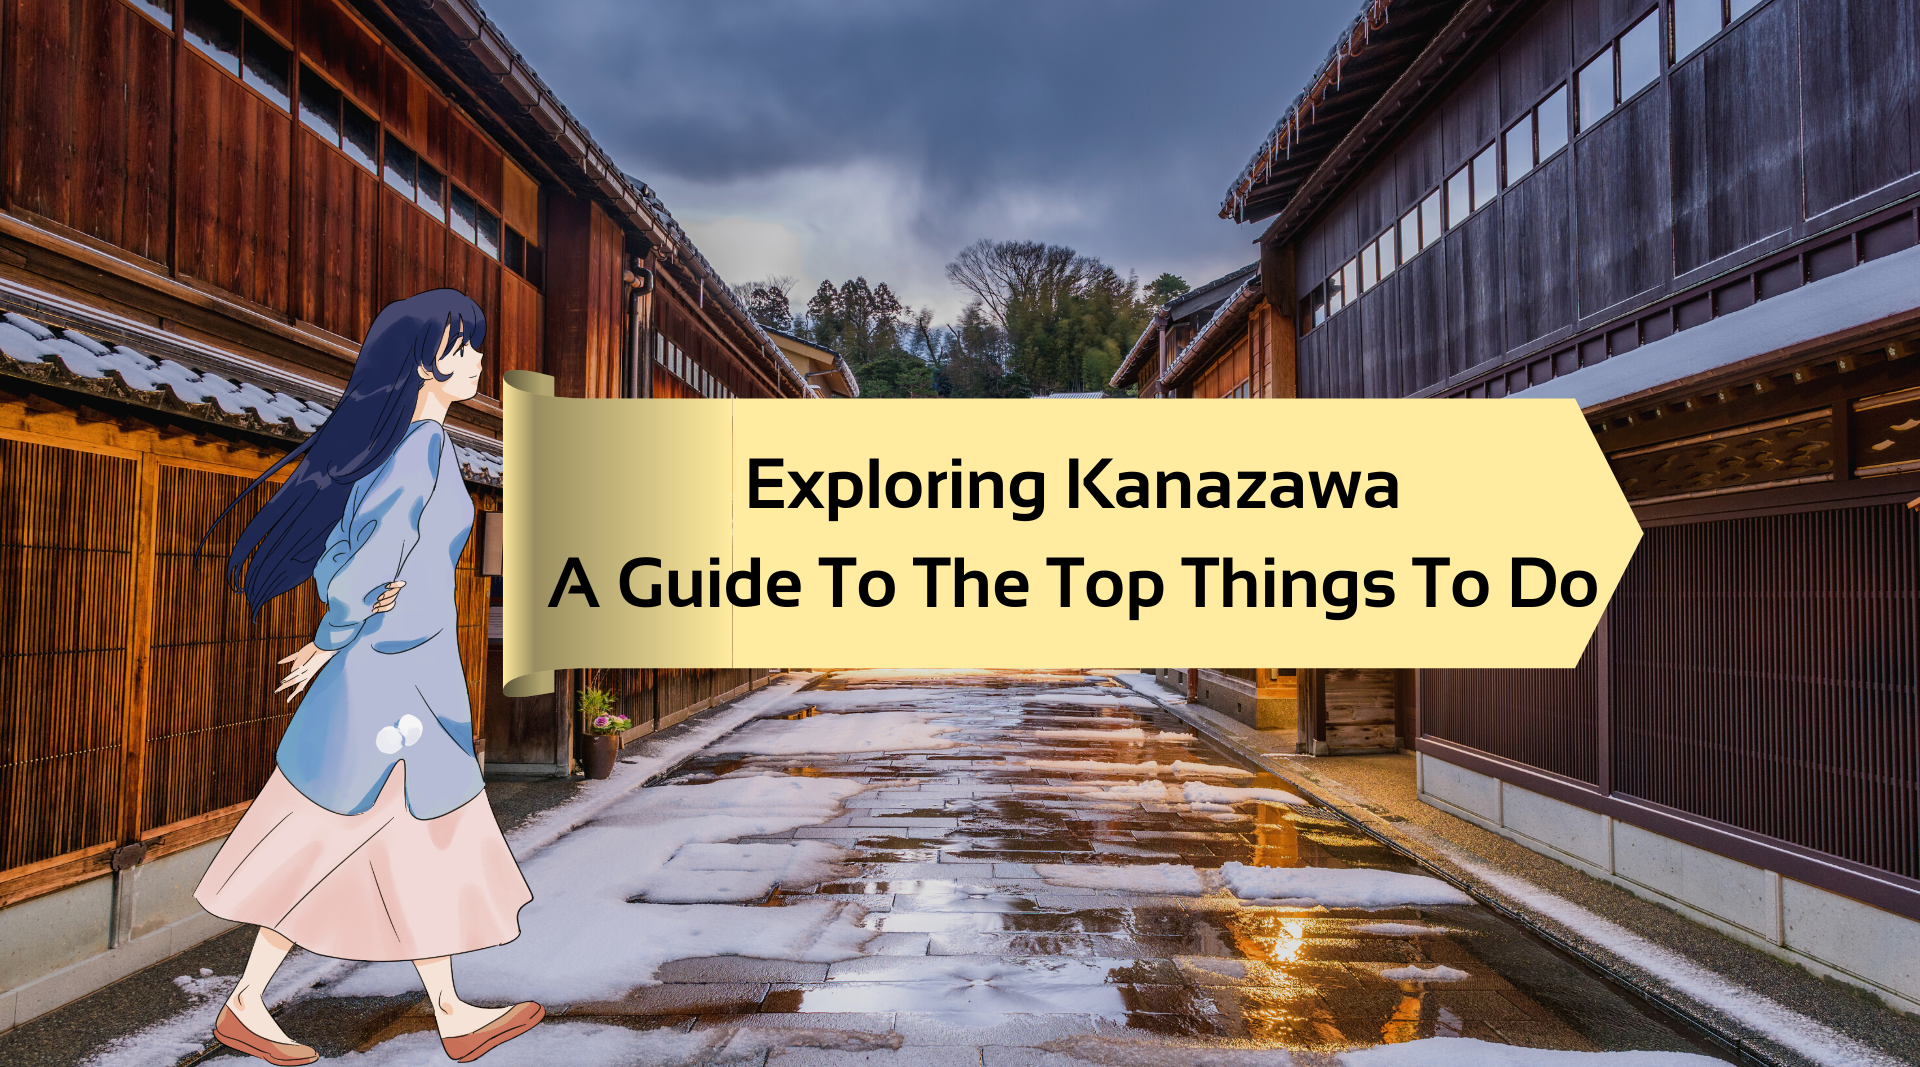 Exploring Kanazawa: A Guide To The Top Things To Do